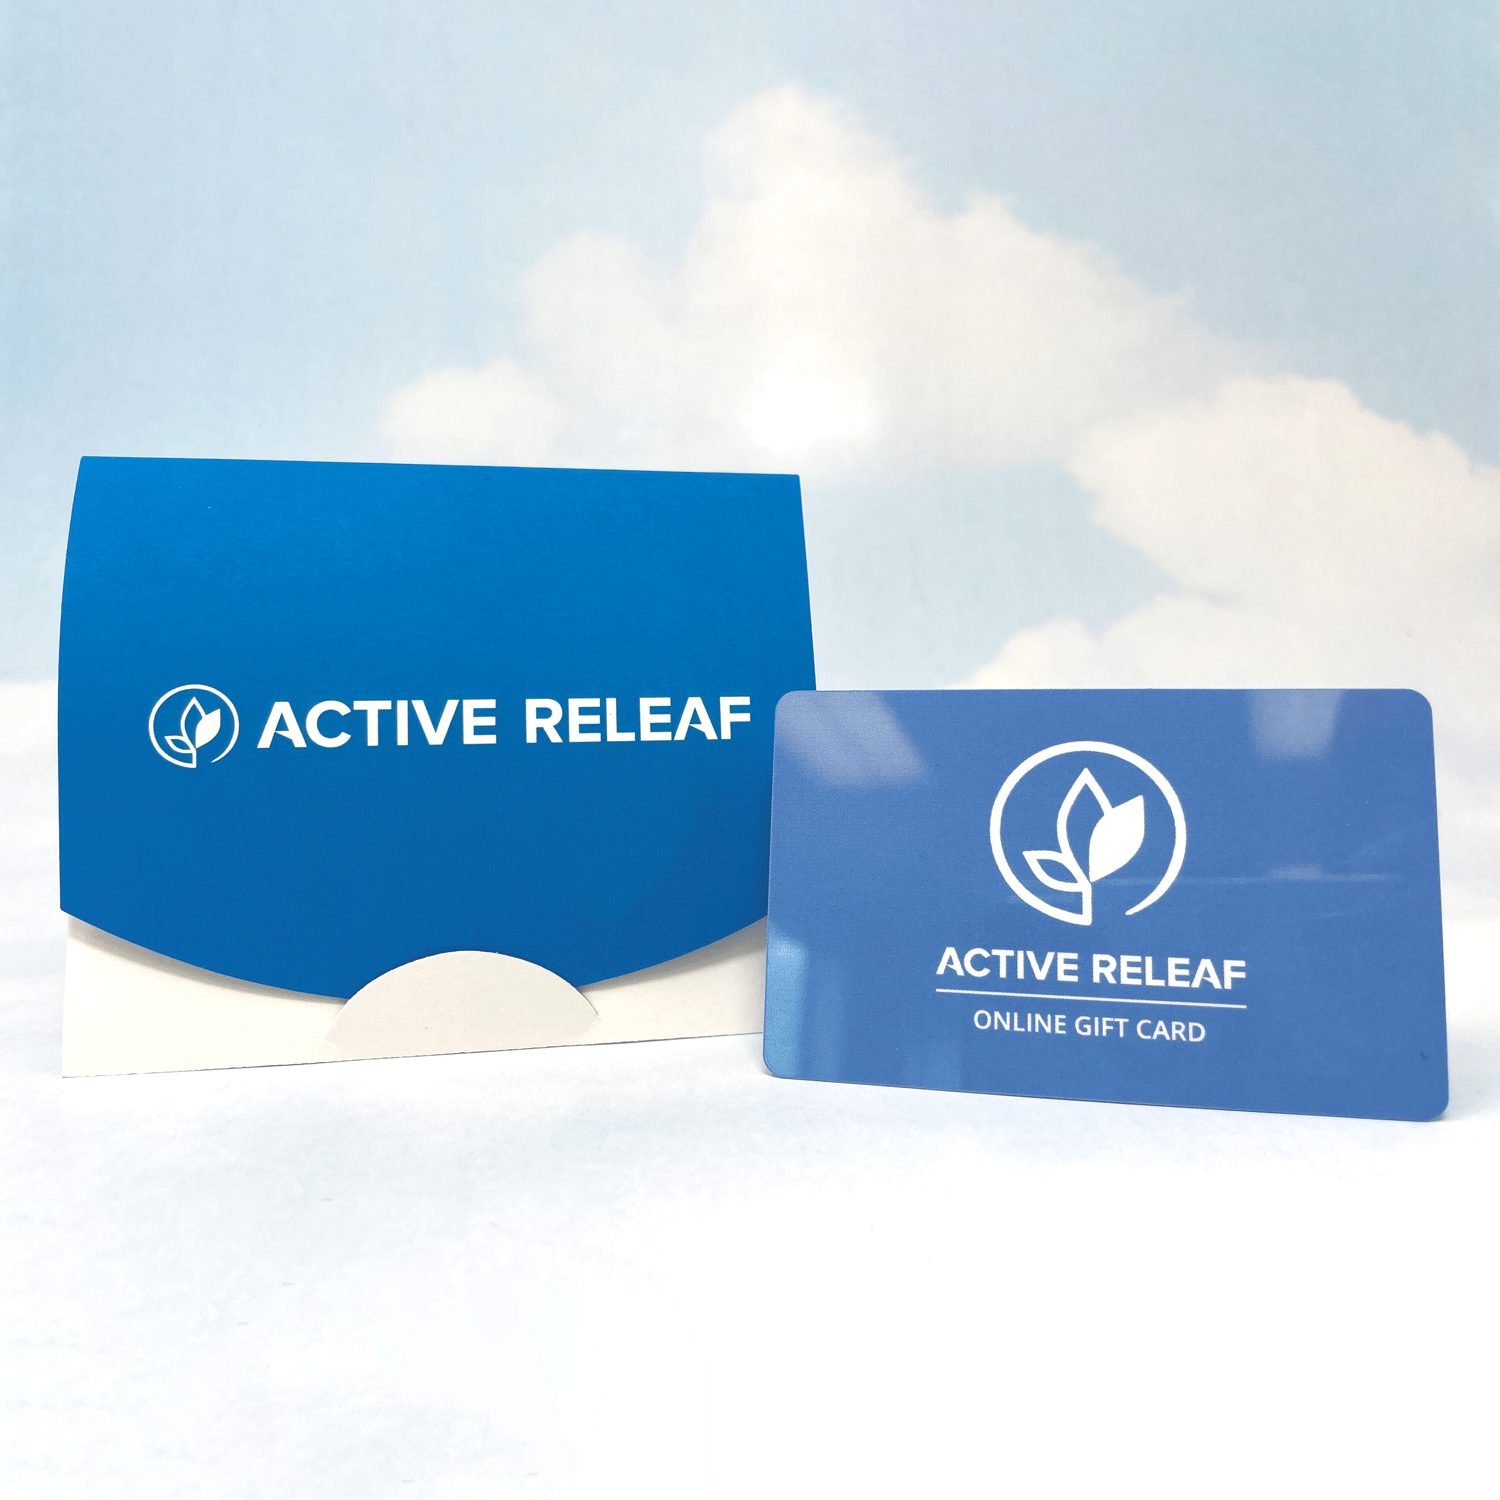 ACTIVE RELEAF Physical Gift Cards Canada